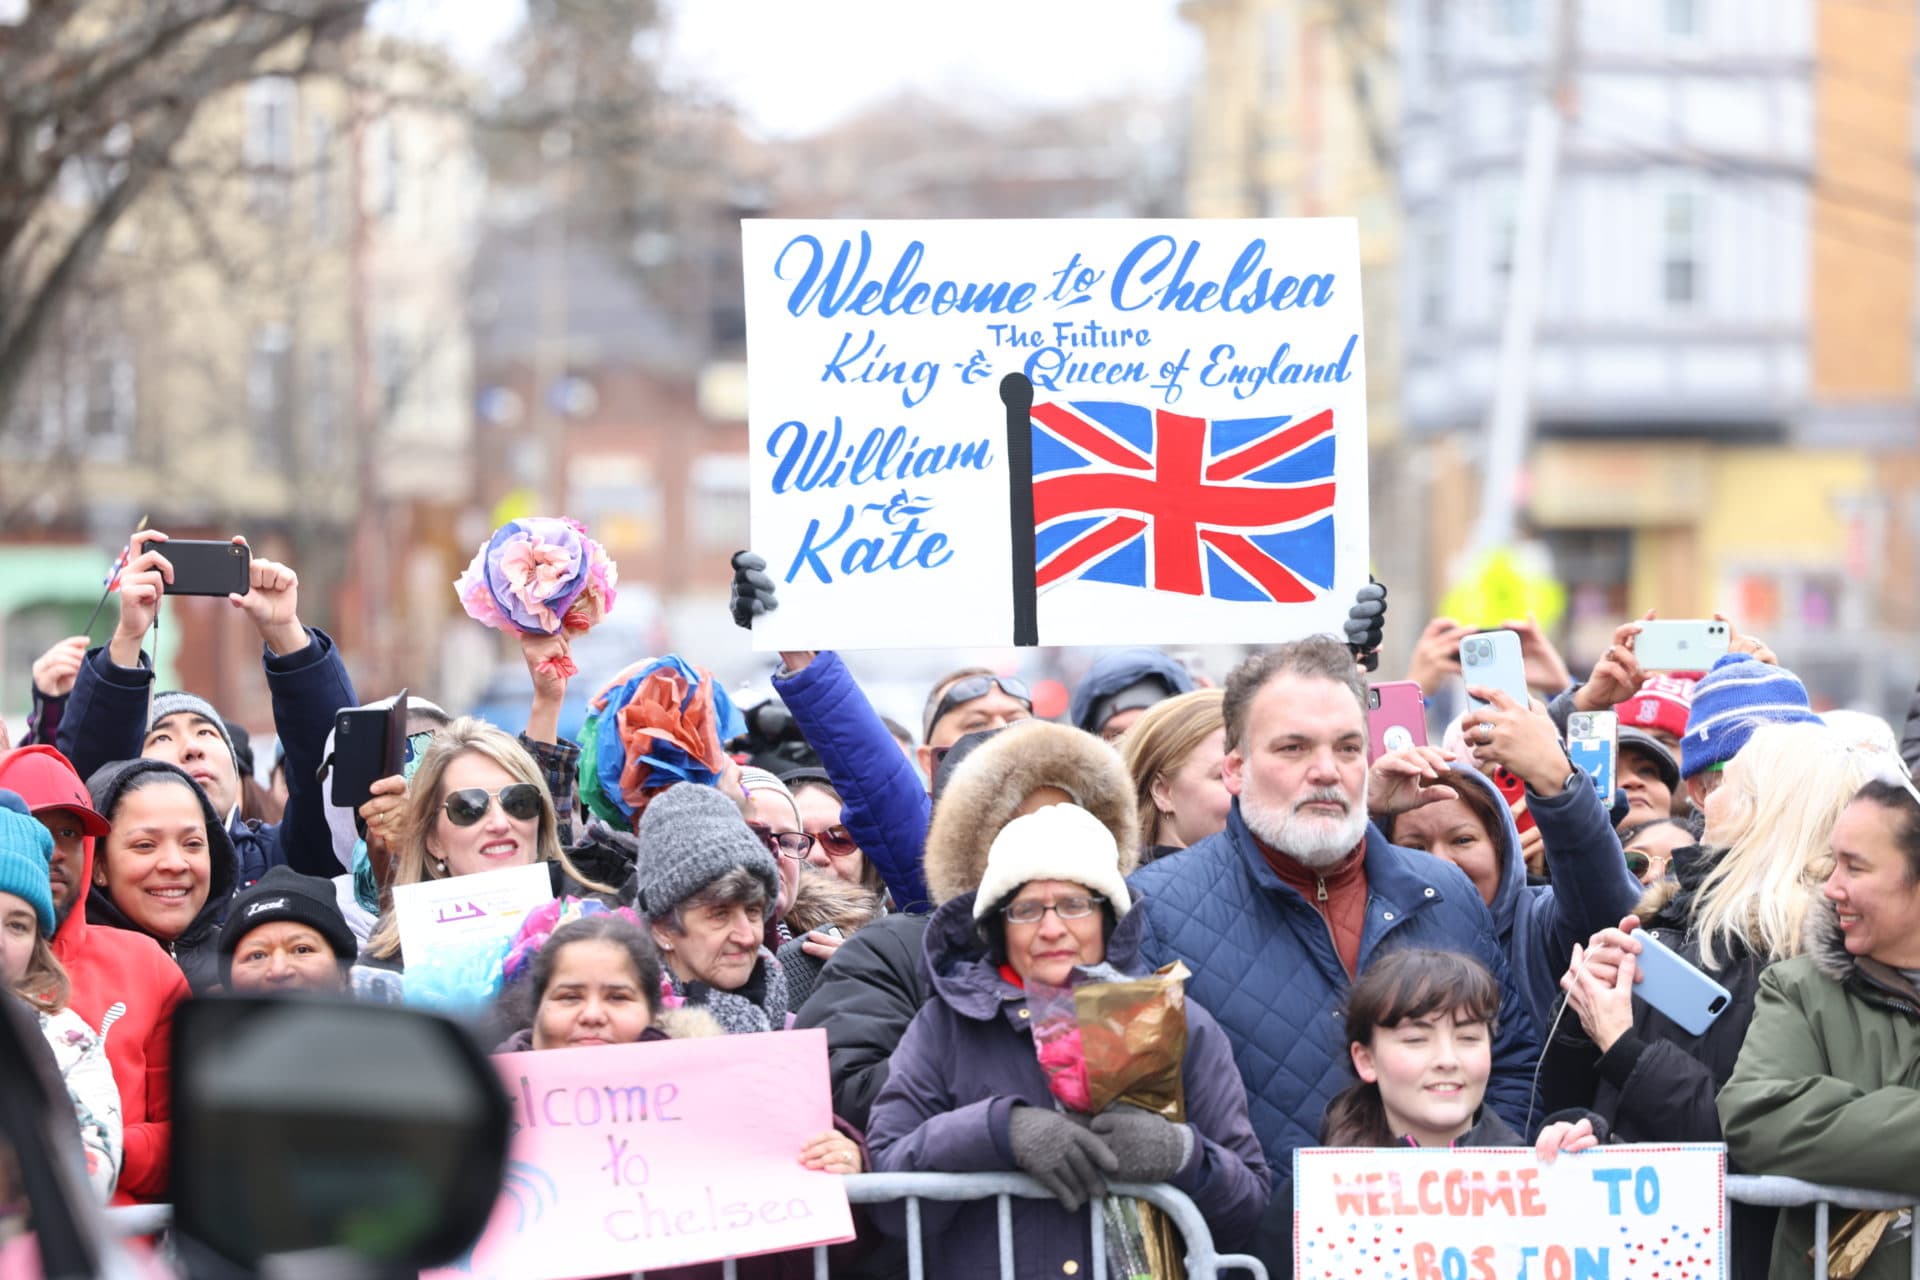 Crowds gather to see Prince William and Kate during a visit to Roca, a non-profit organization focusing on high-risk young people, in Chelsea. (Ian Vogler/Getty Images)